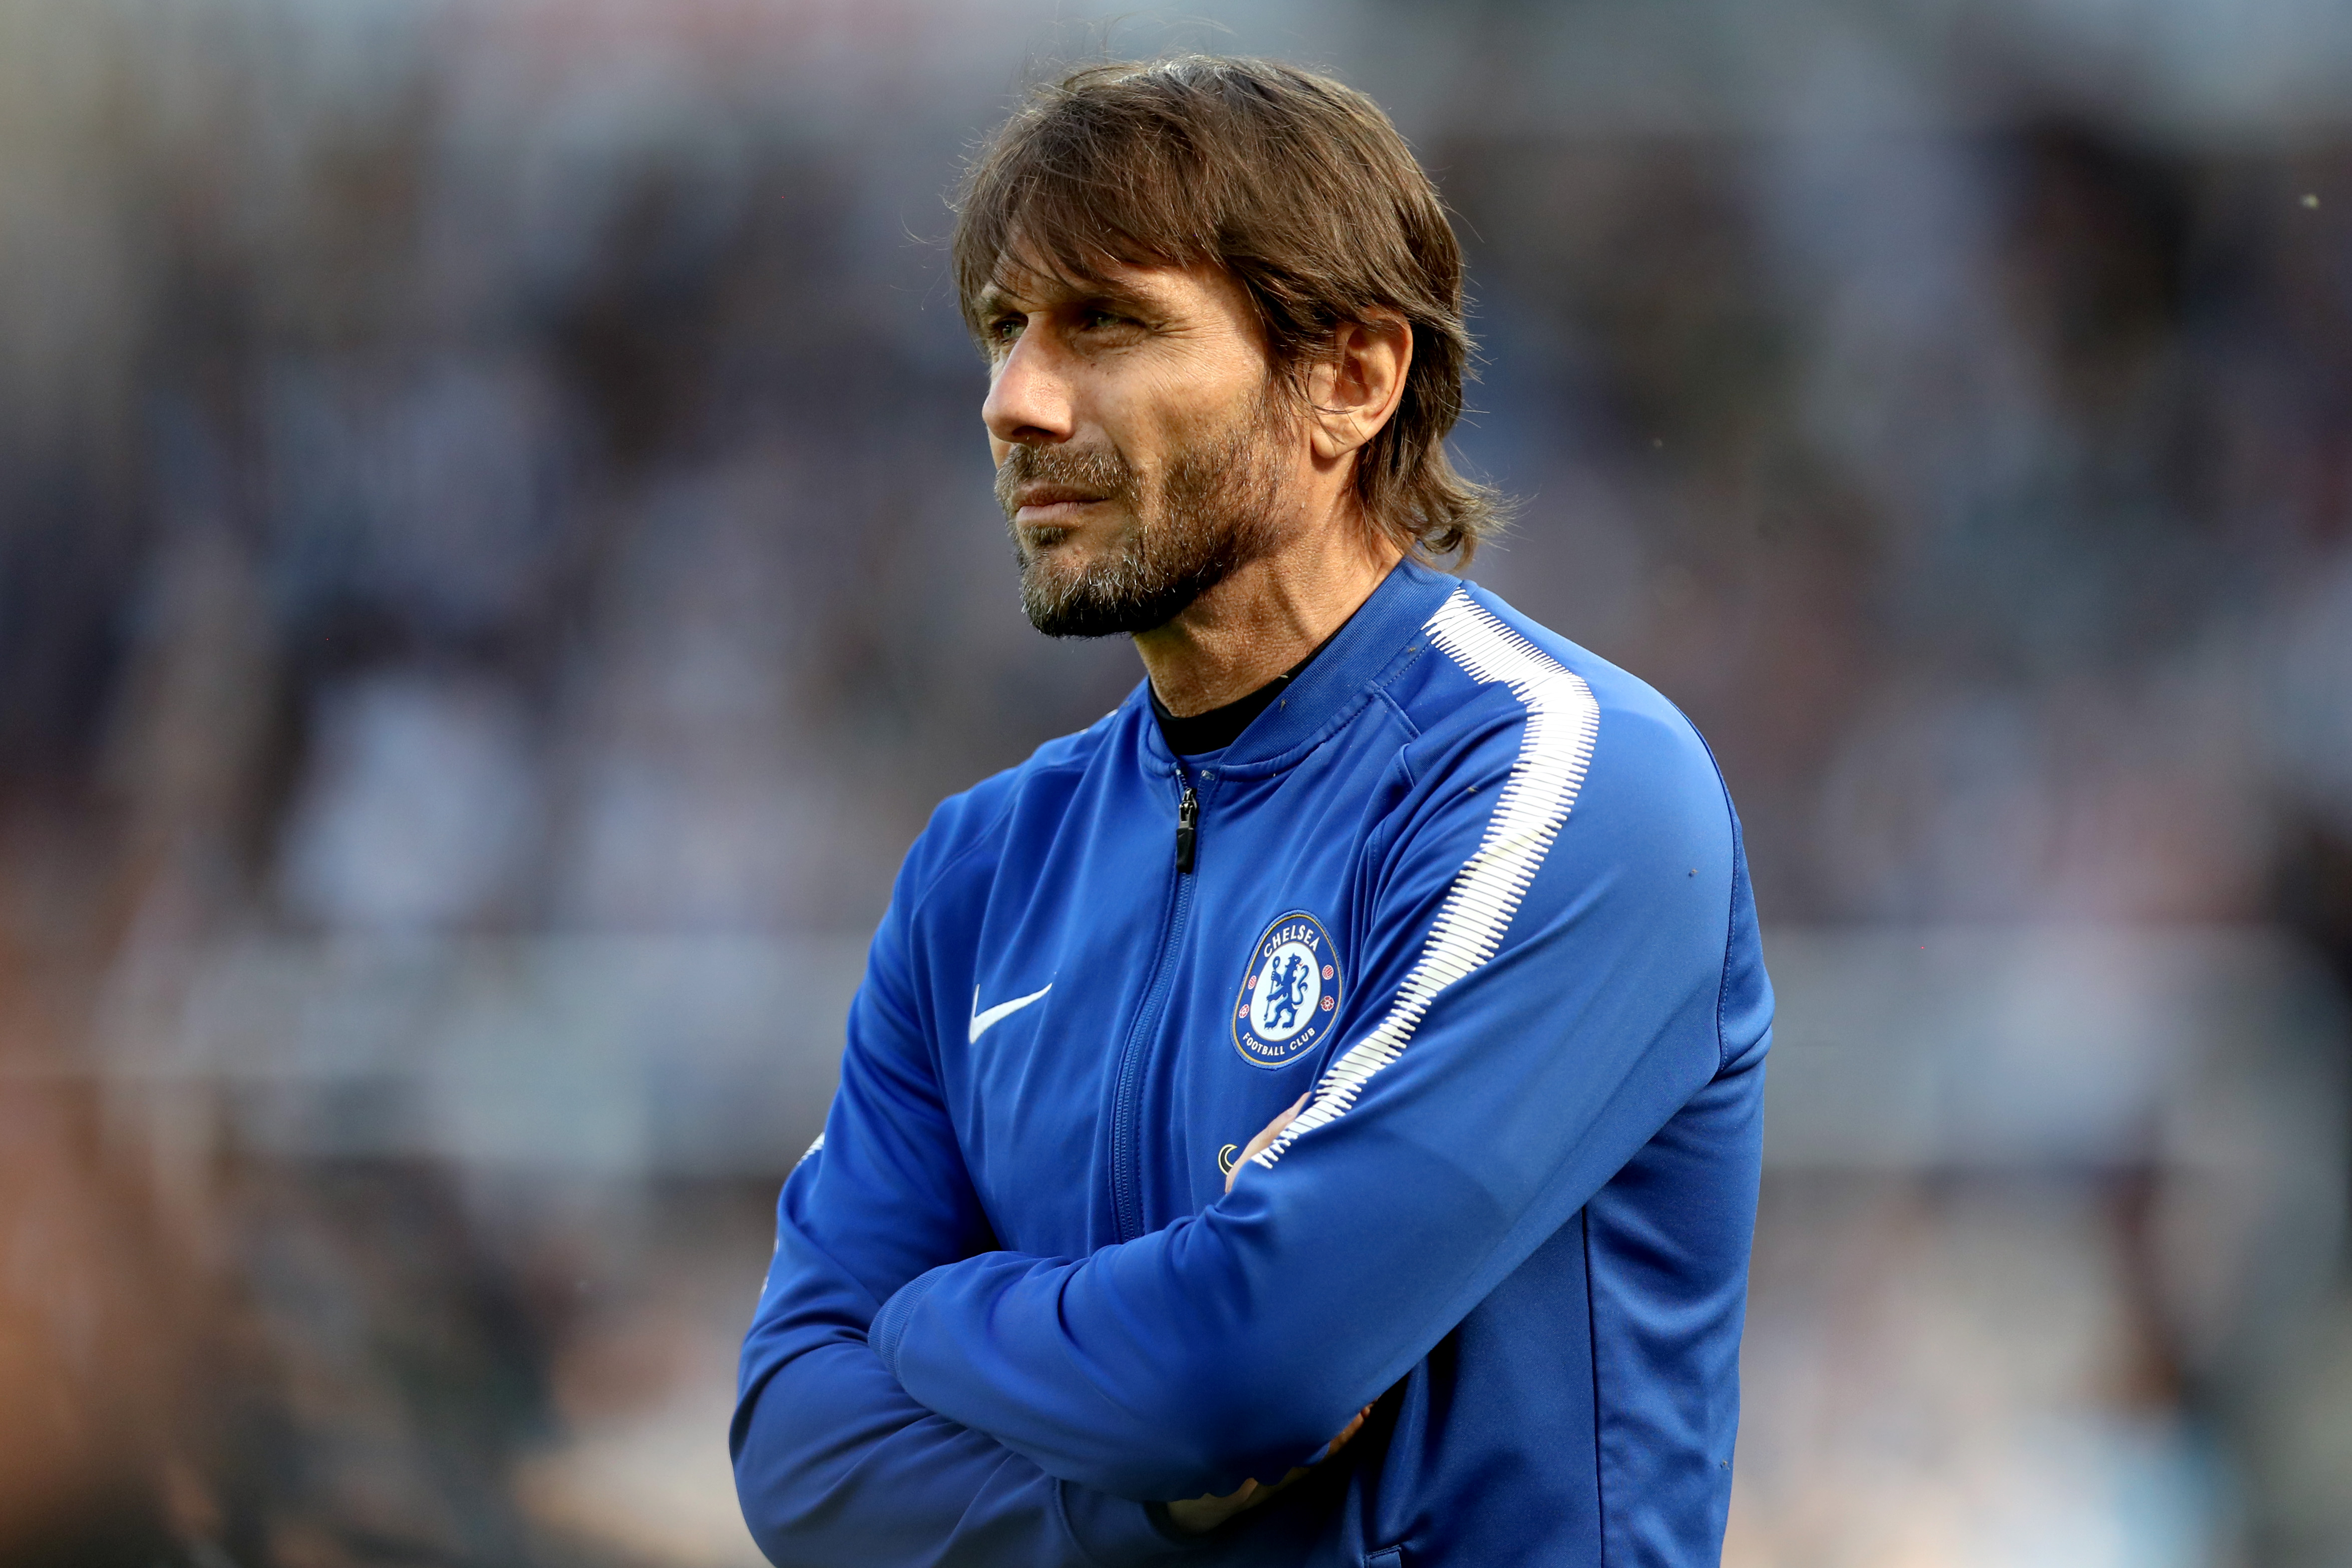 NEWCASTLE UPON TYNE, ENGLAND - MAY 13: Antonio Conte, Manager of Chelsea looks on during the Premier League match between Newcastle United and Chelsea at St. James Park on May 13, 2018 in Newcastle upon Tyne, England. (Photo by Ian MacNicol/Getty Images)